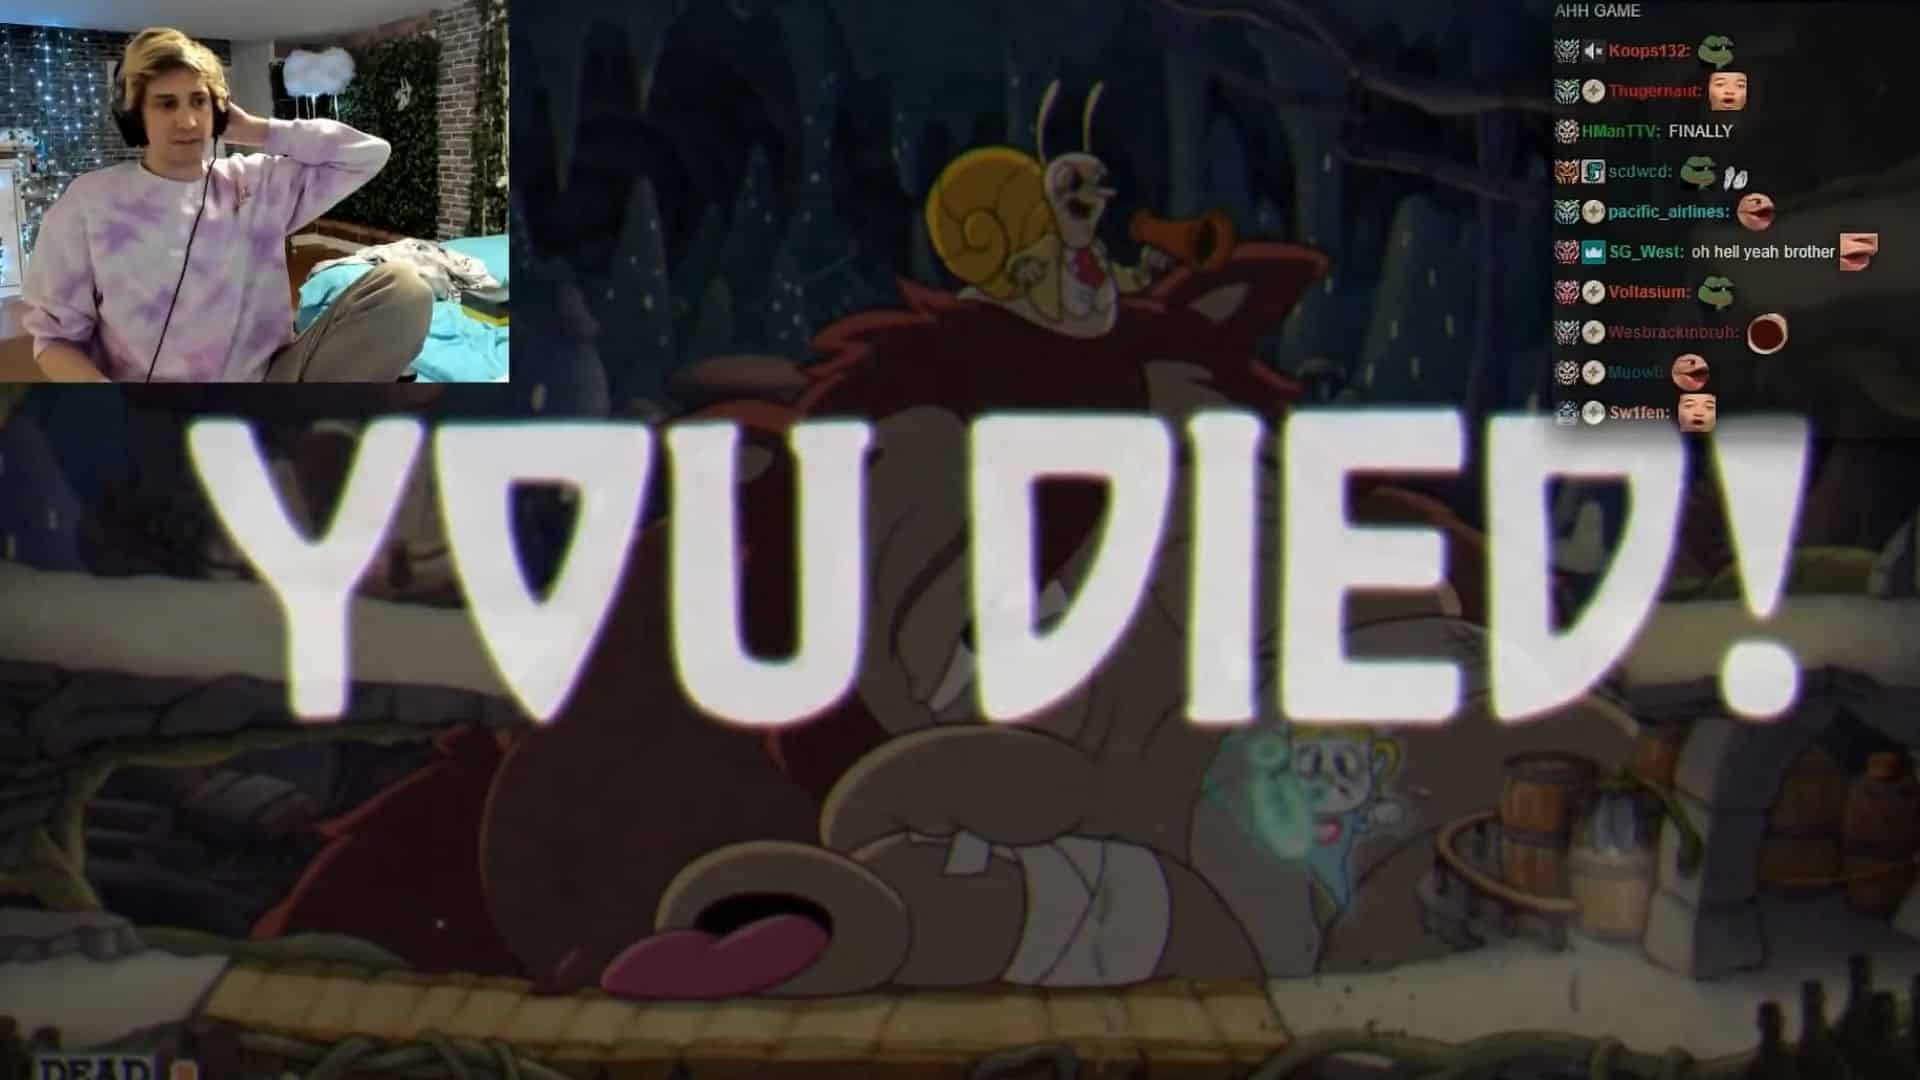 xqc on cuphead you died screen